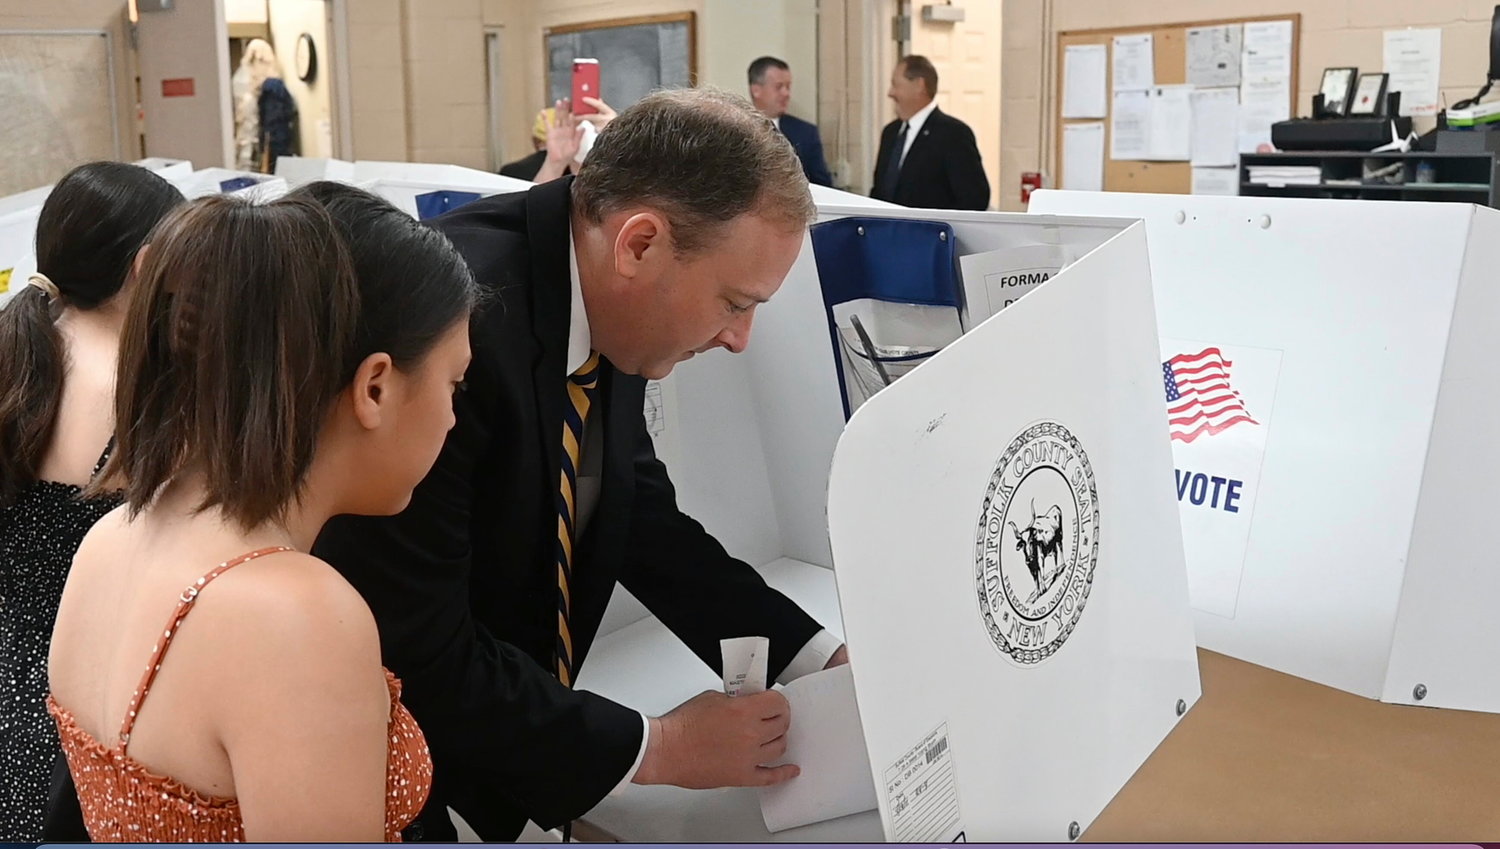 Republican candidate for governor and U.S. Rep. Lee Zeldin casts his vote for governor at the Mastic Beach firehouse on Tuesday, June. 28, 2022 in Mastic Beach, N.Y.  New Yorkers are casting votes in a governor‚Äôs race Tuesday that for the first time in a decade does not include the name ‚ÄúCuomo‚Äù at the top of the ticket. (James Carbone/Newsday via AP)